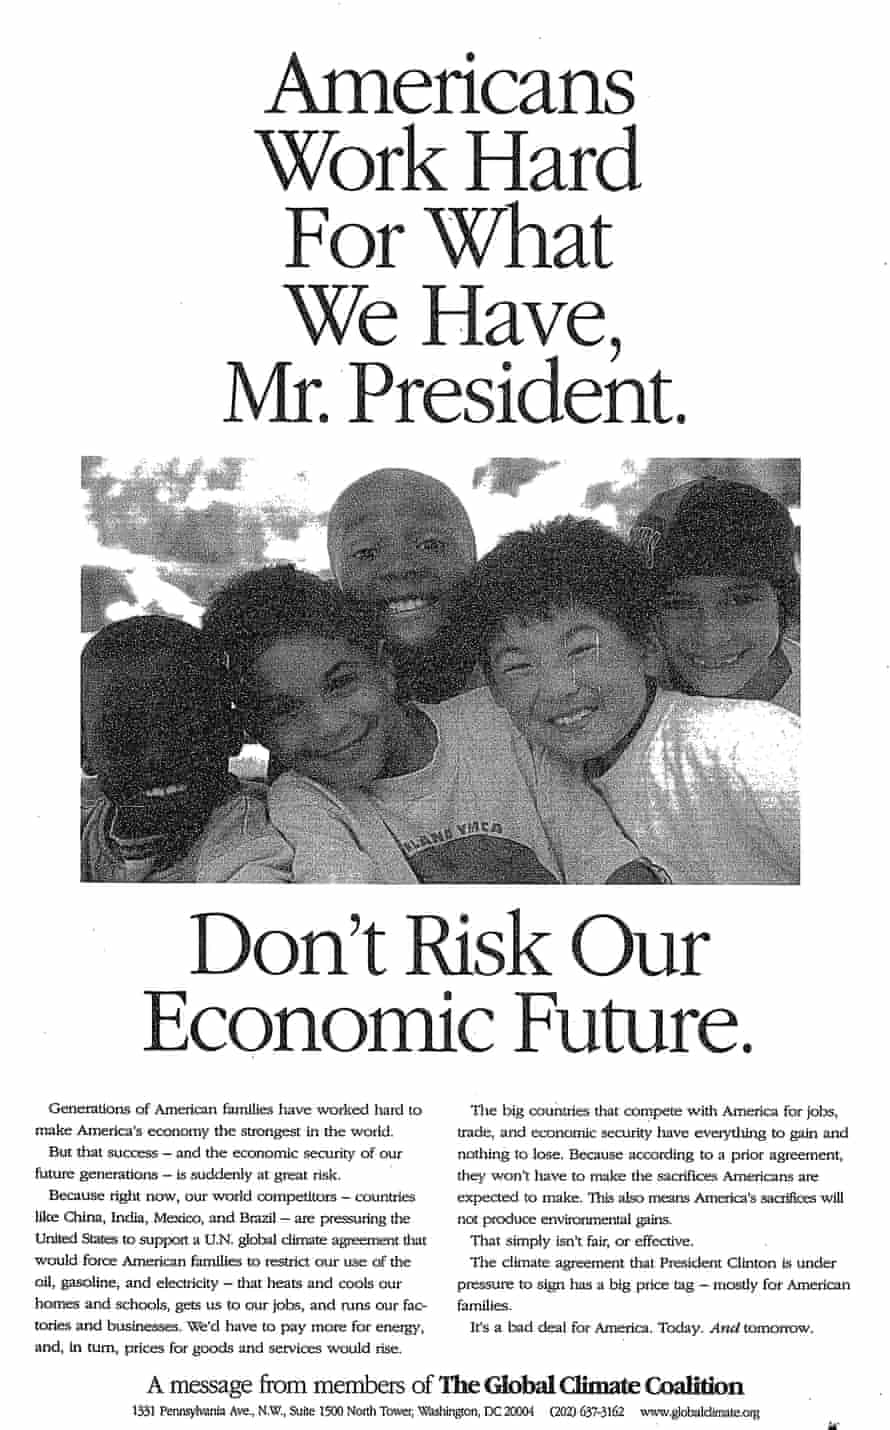 Global Climate Coalition, 1997 ad: "Americans work hard for what we have, Mr. President. Don't risk our economic future."